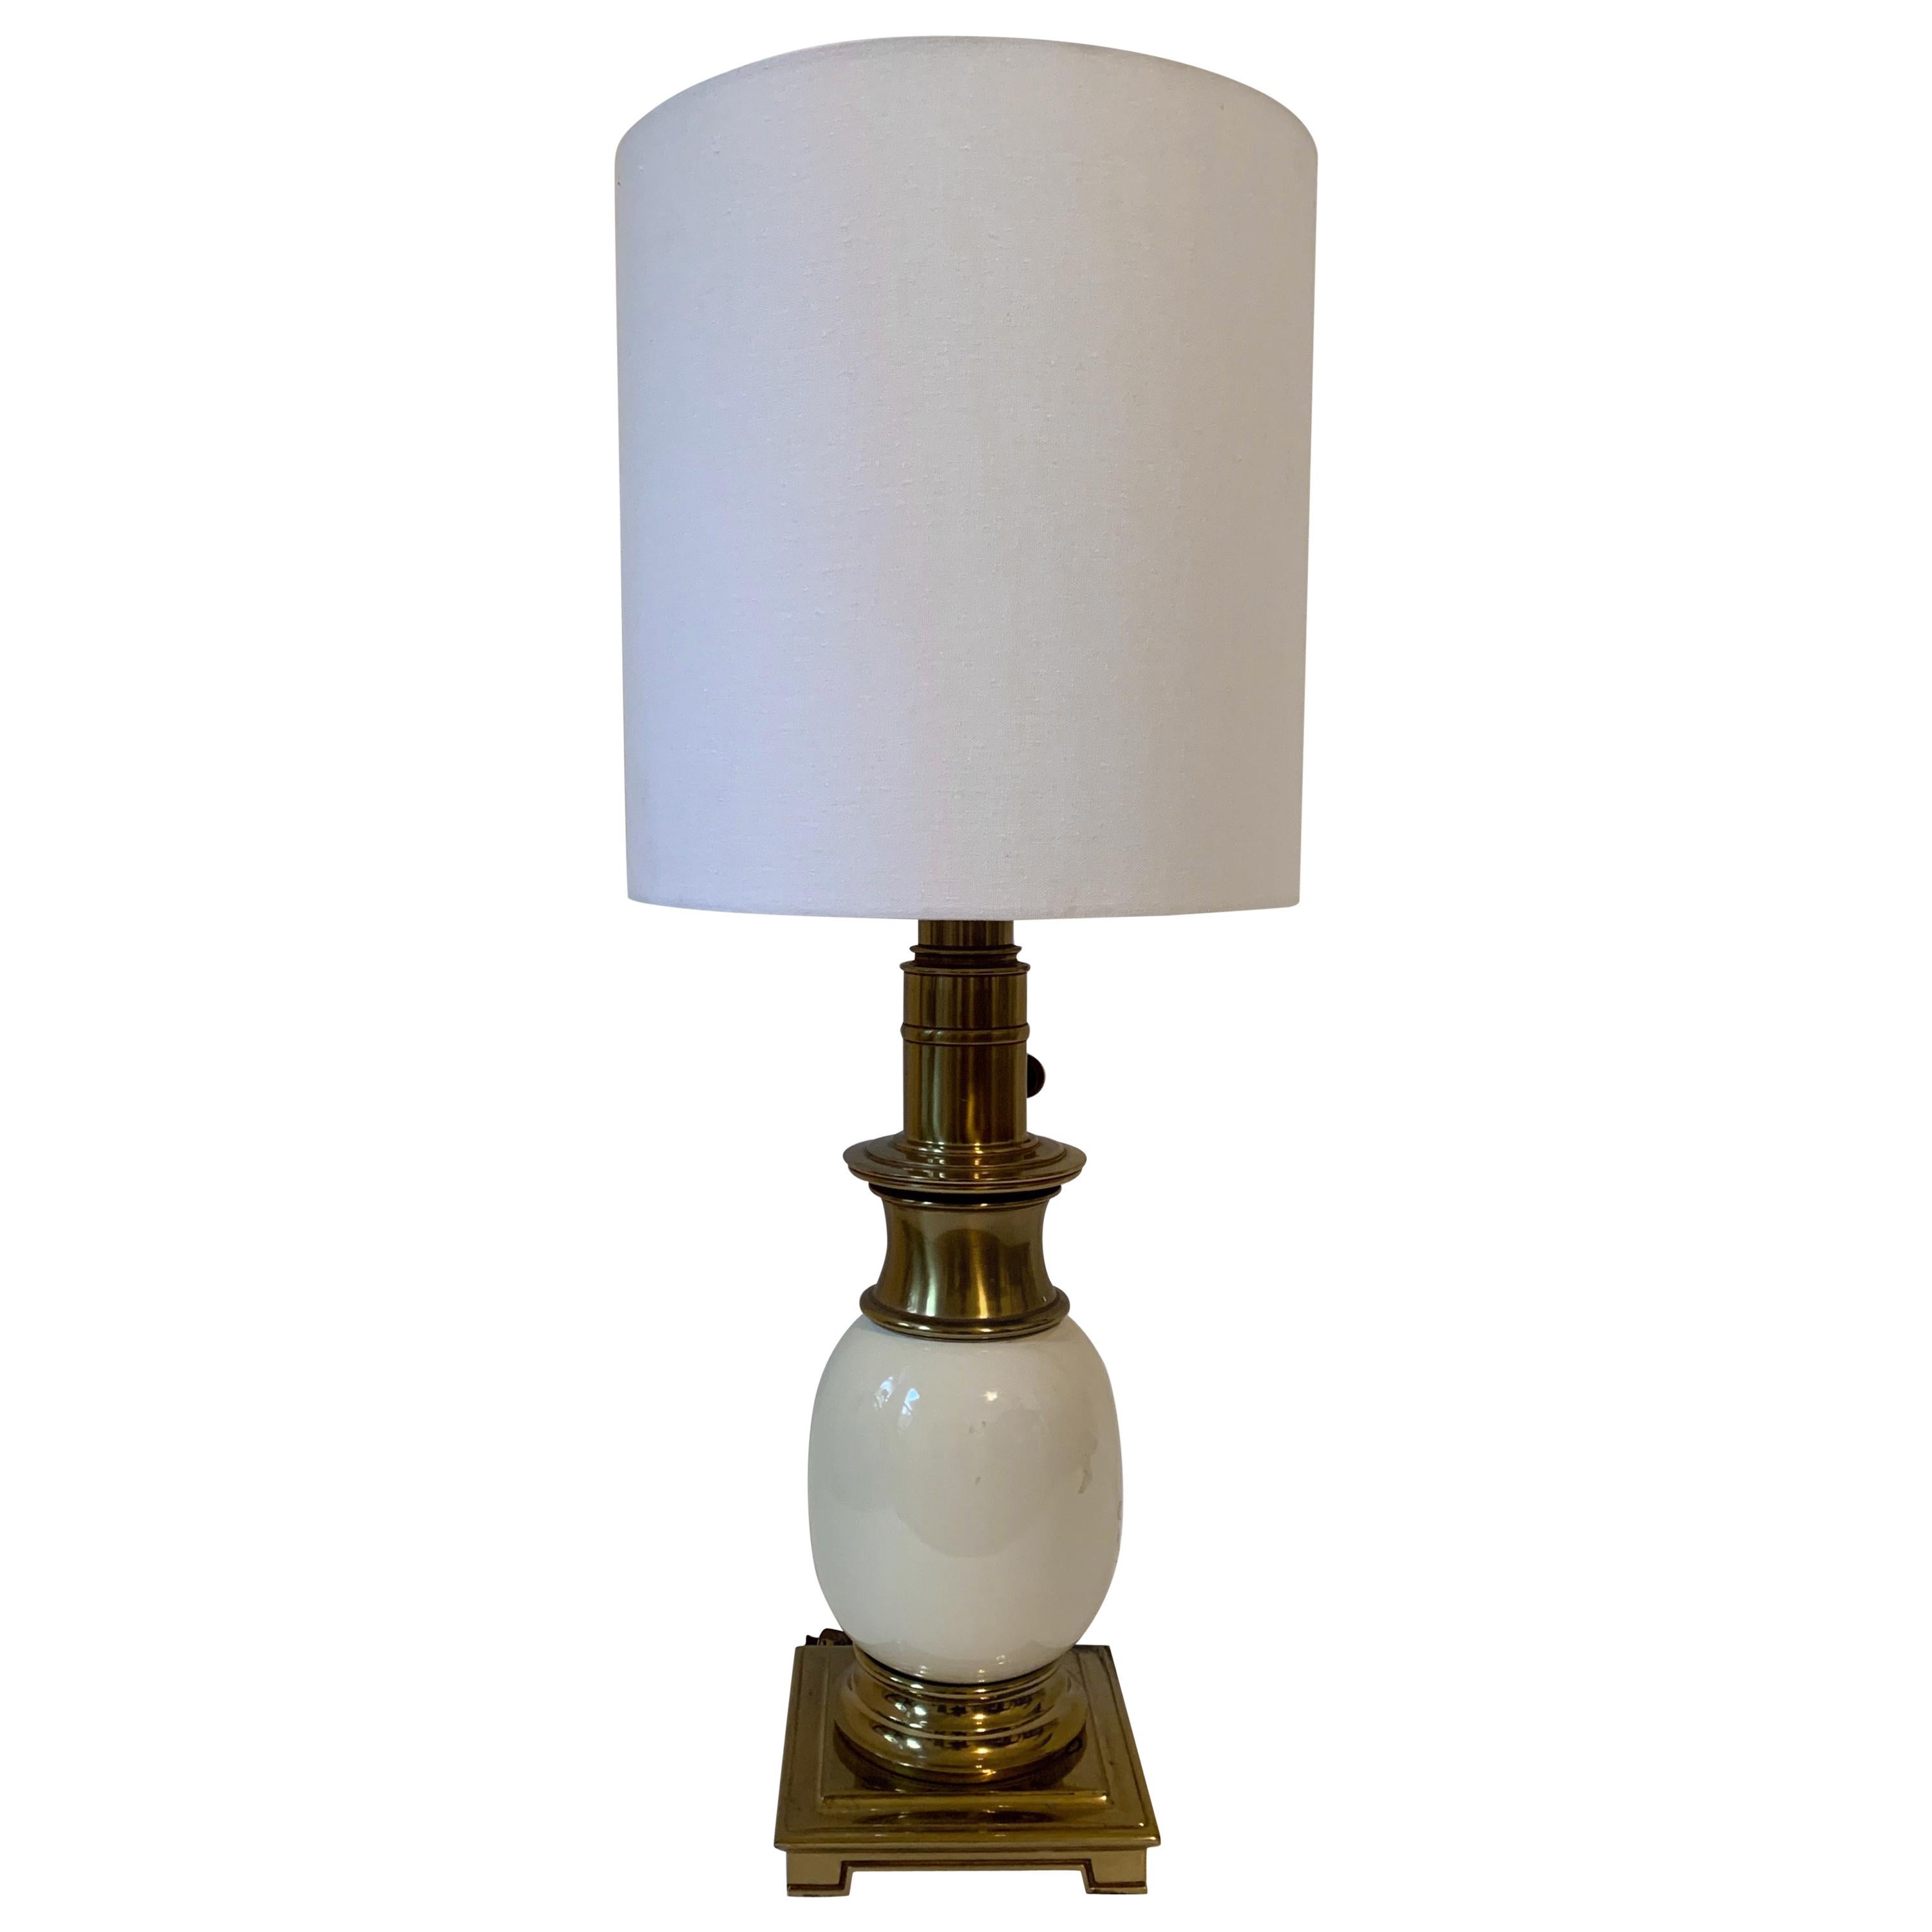 Stiffel Ostrich Egg Porcelain and Brass Table Lamp